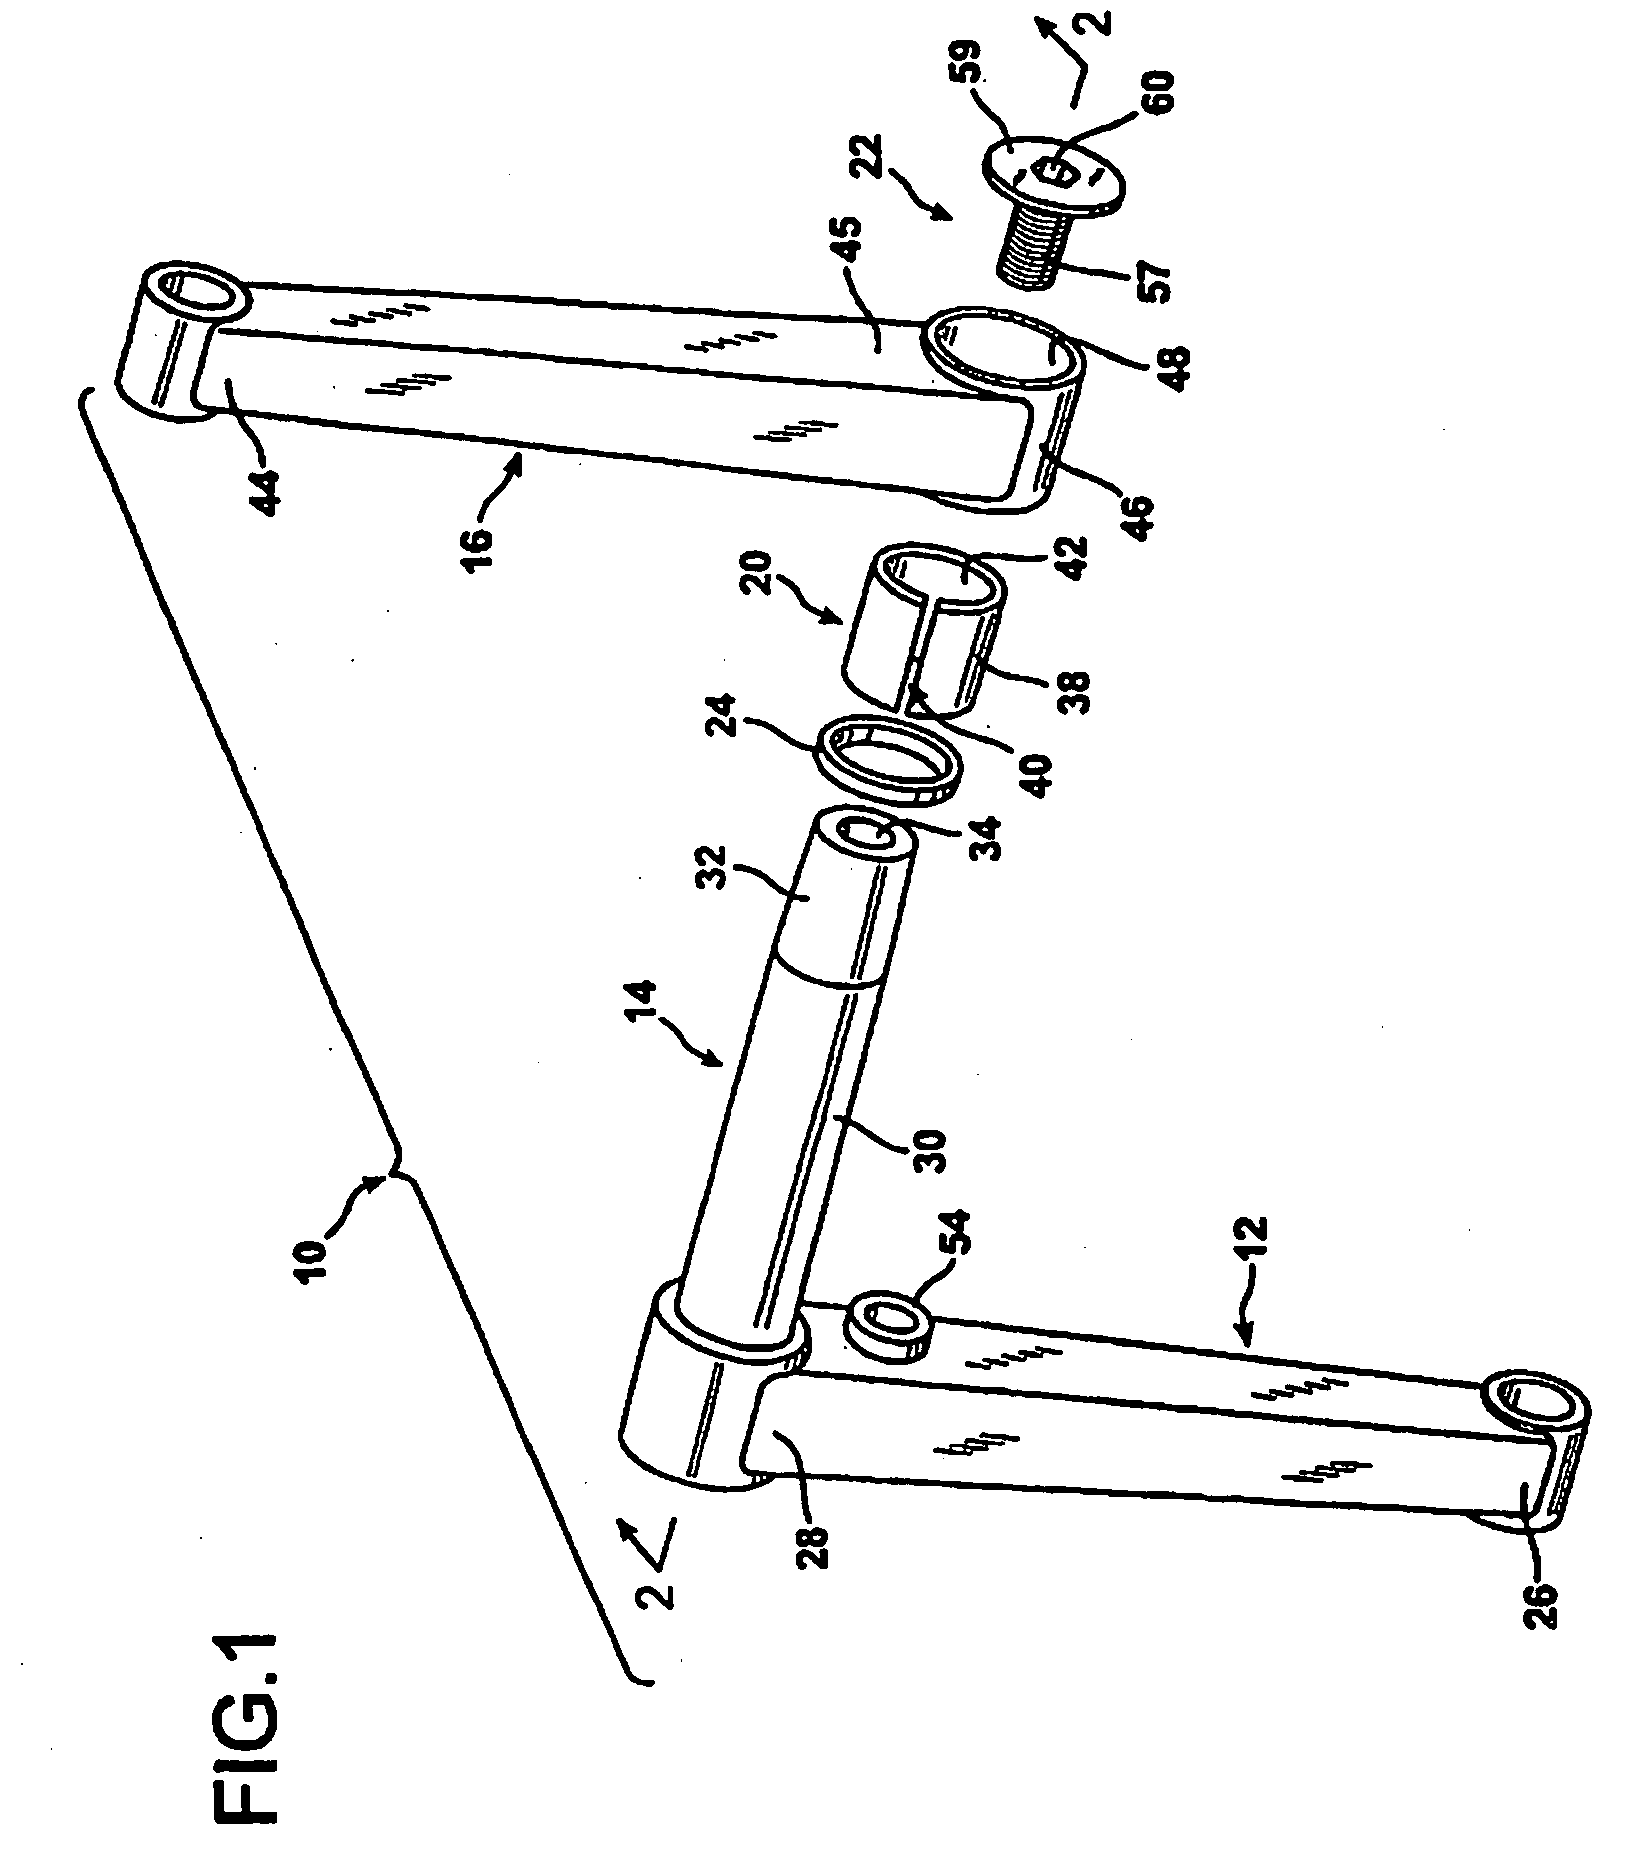 Bicycle crank assembly